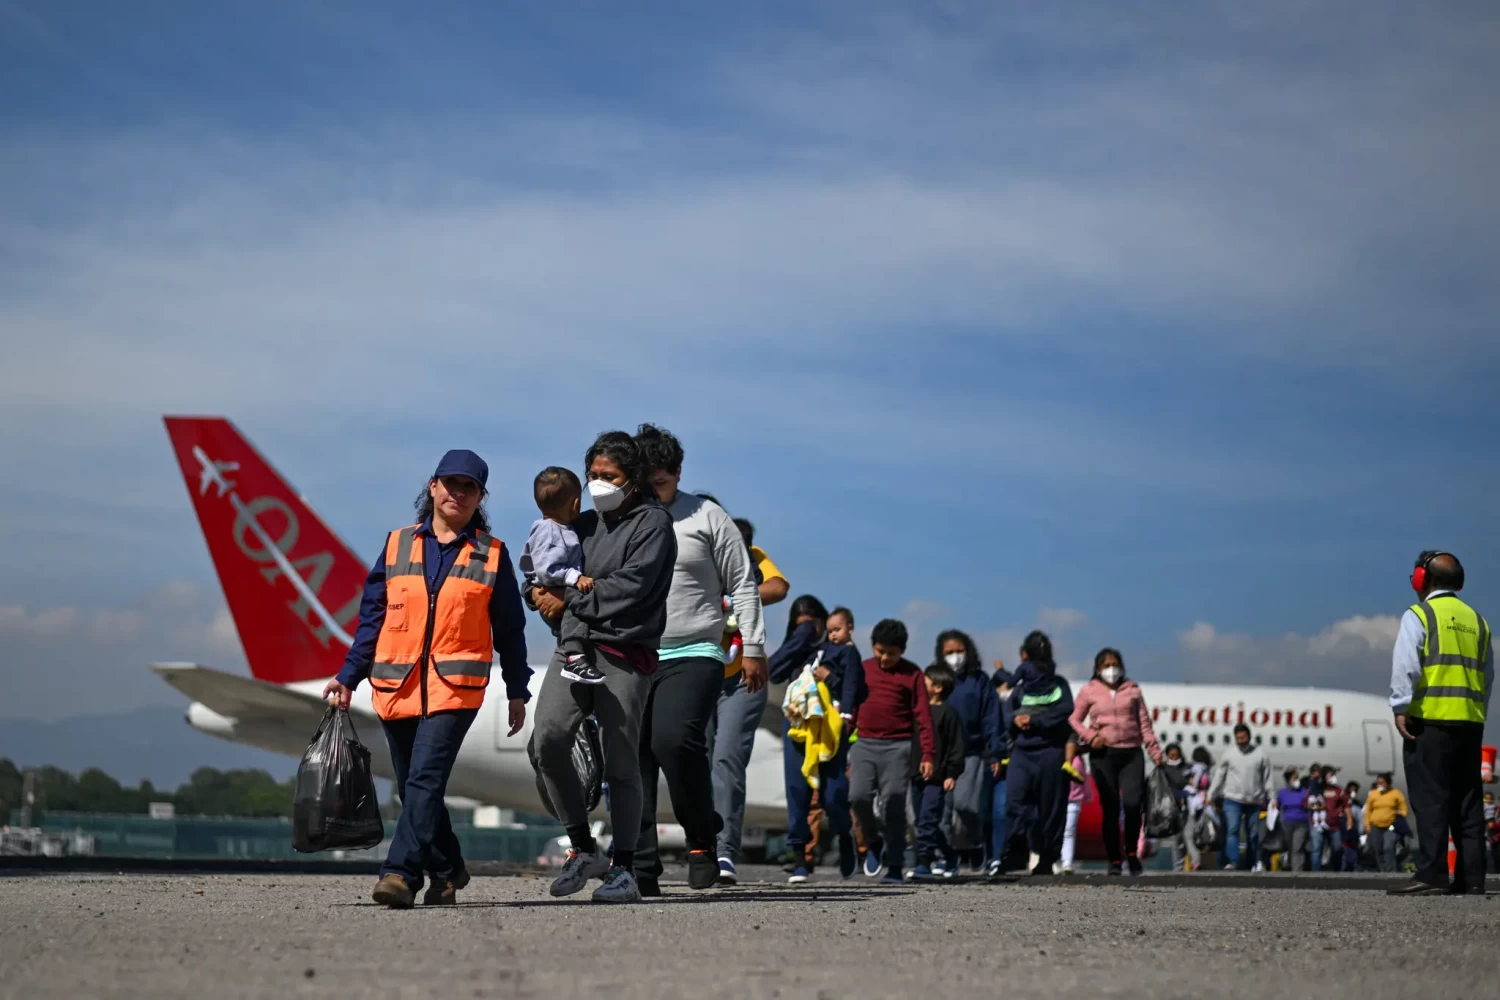 People arriving in Guatemala after being deported from the United States in January.Credit...Johan Ordonez/Agence France-Presse — Getty Images